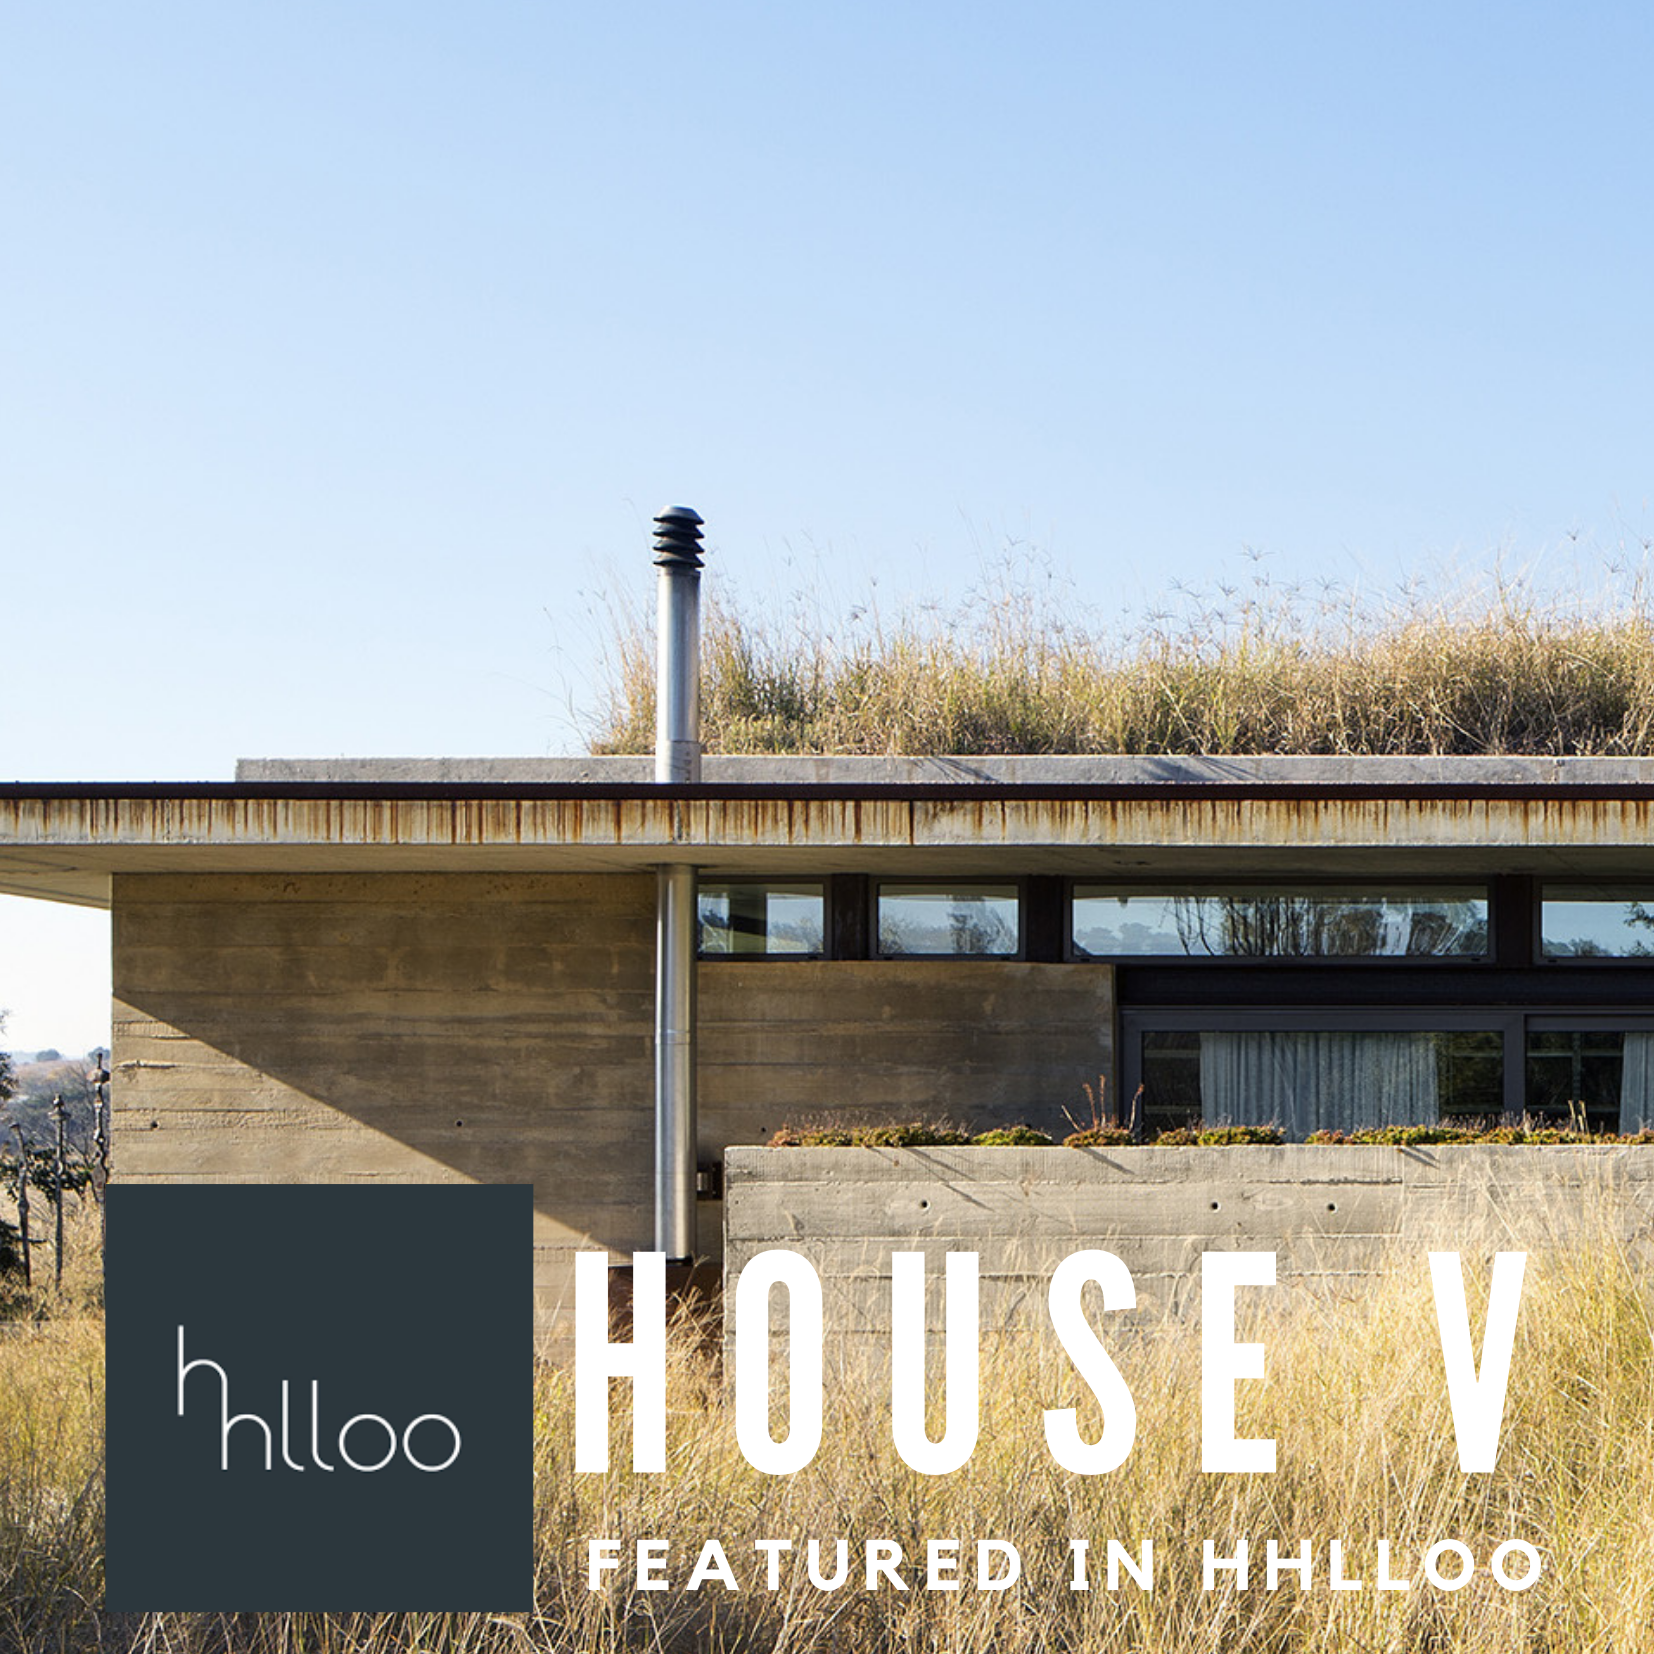 House V featured on Hhlloo